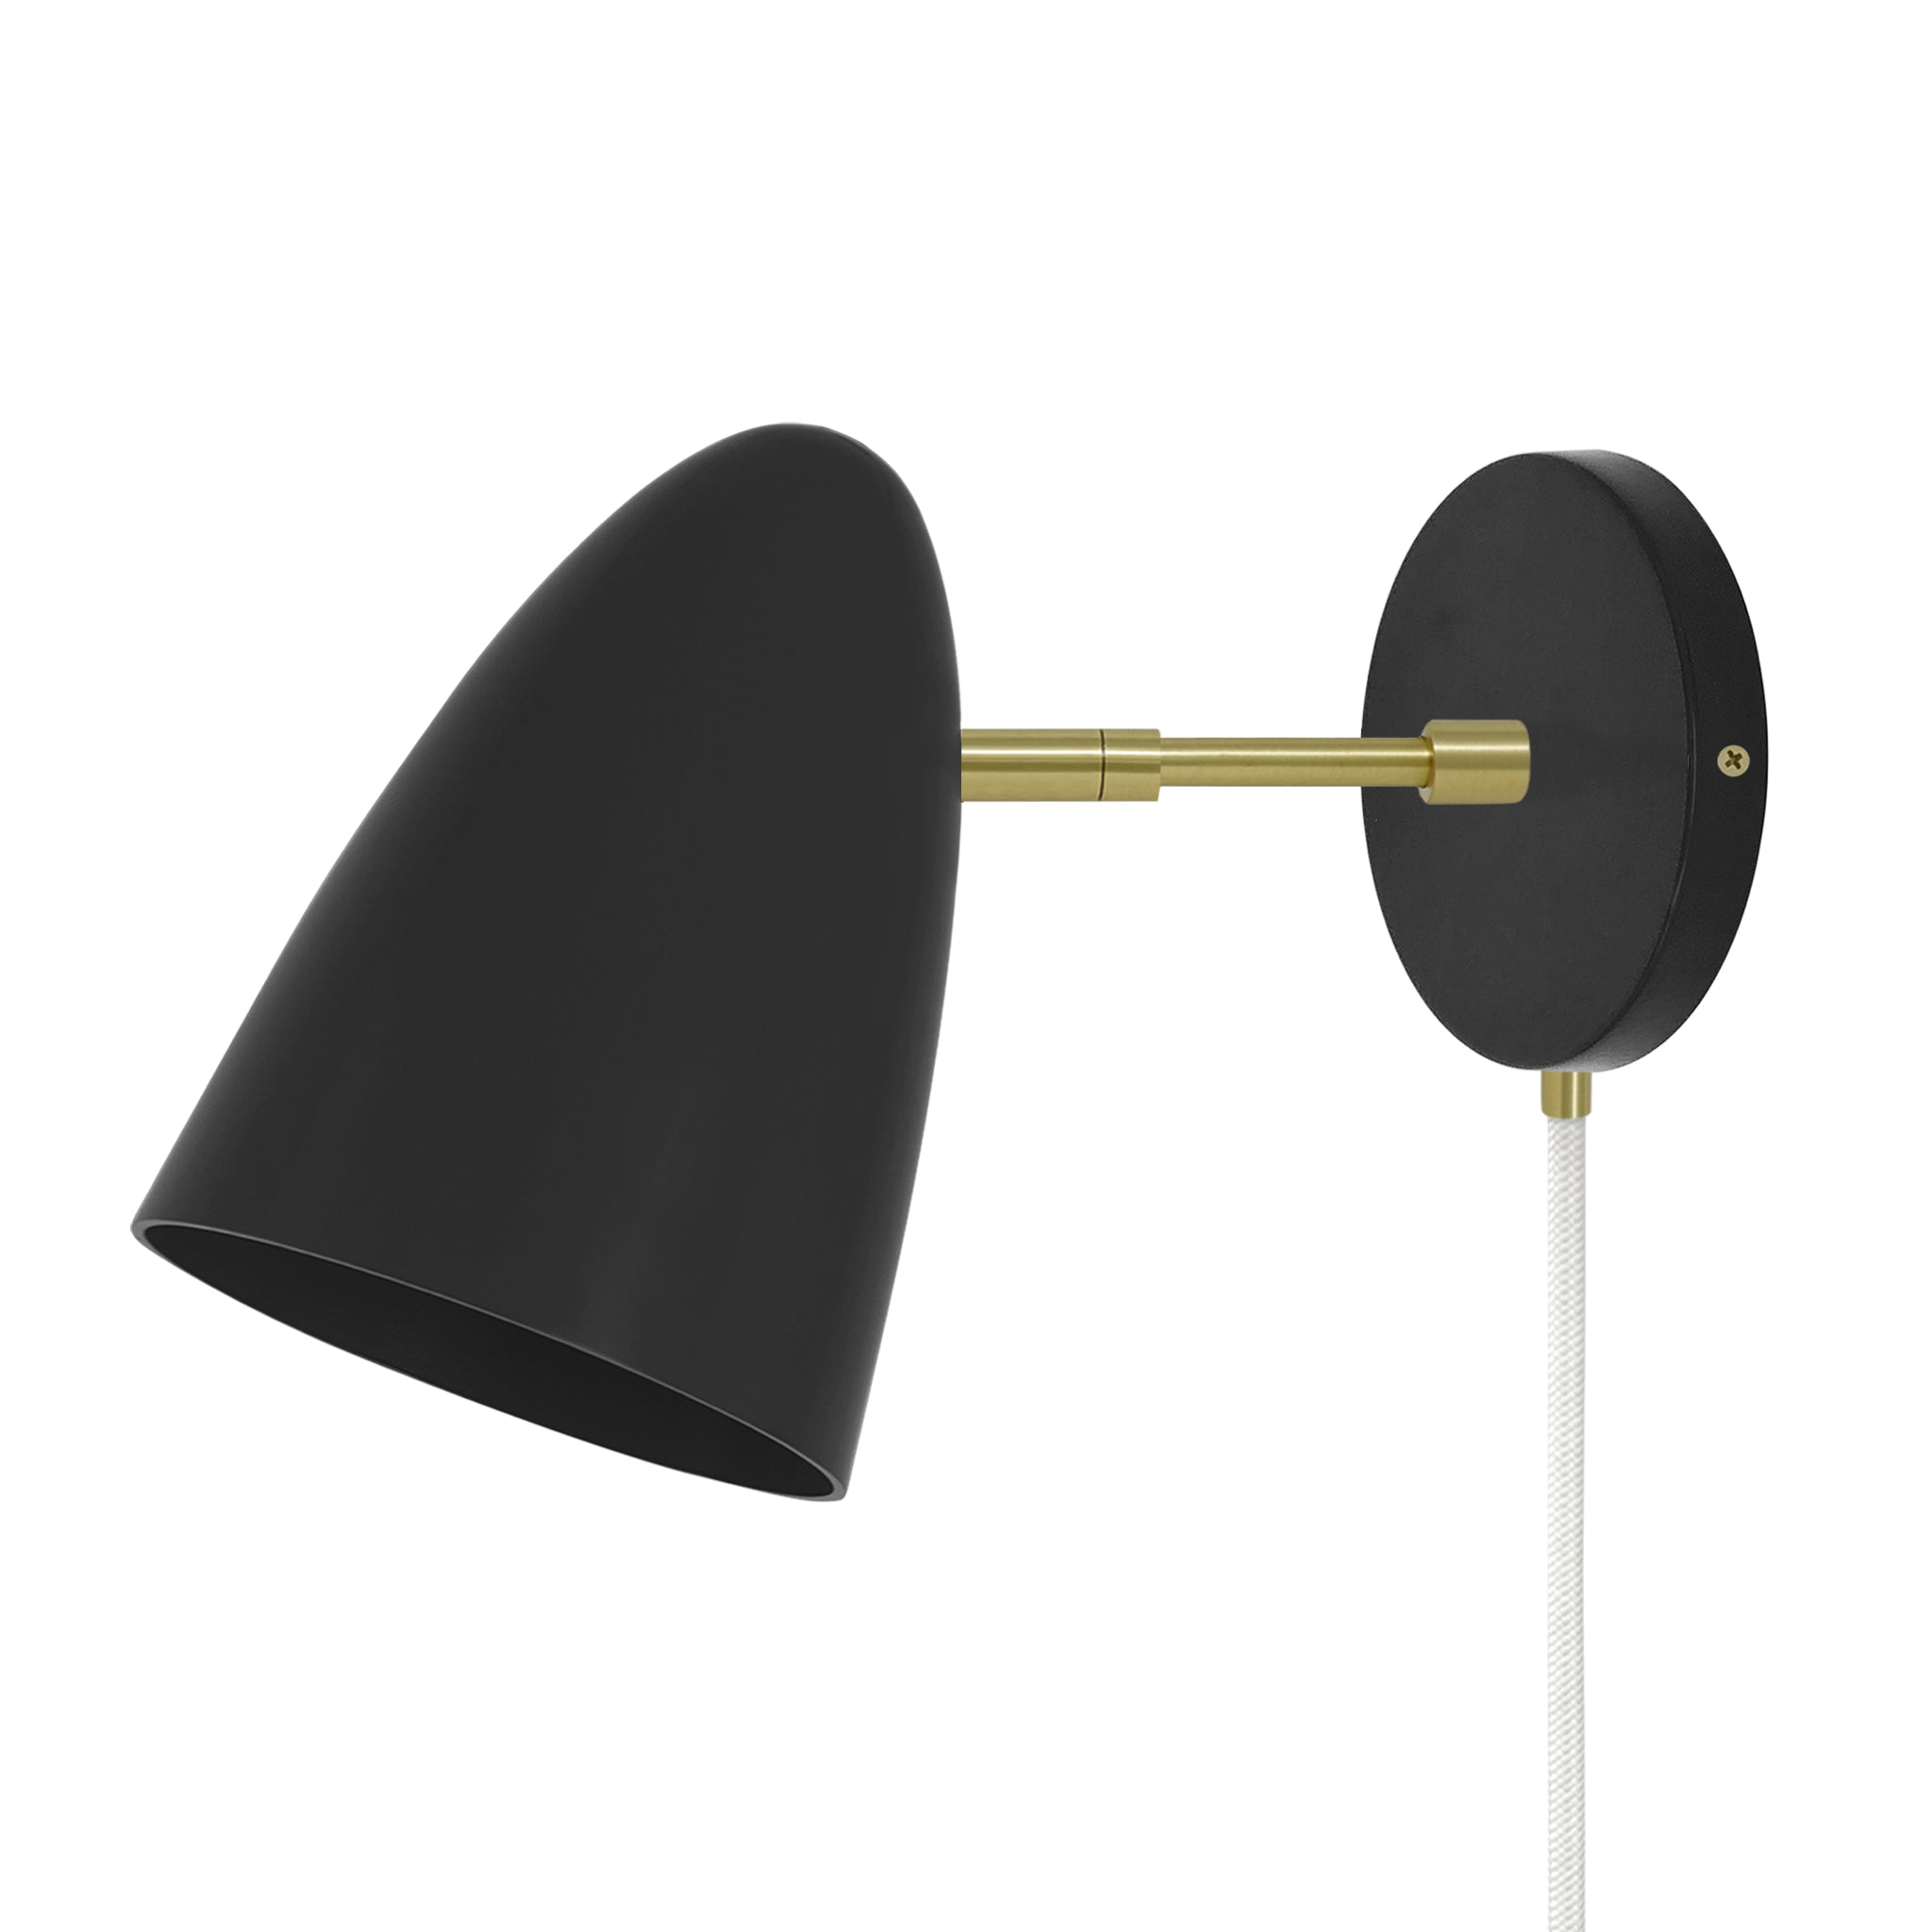 Brass and black color Boom plug-in sconce 3" arm Dutton Brown lighting